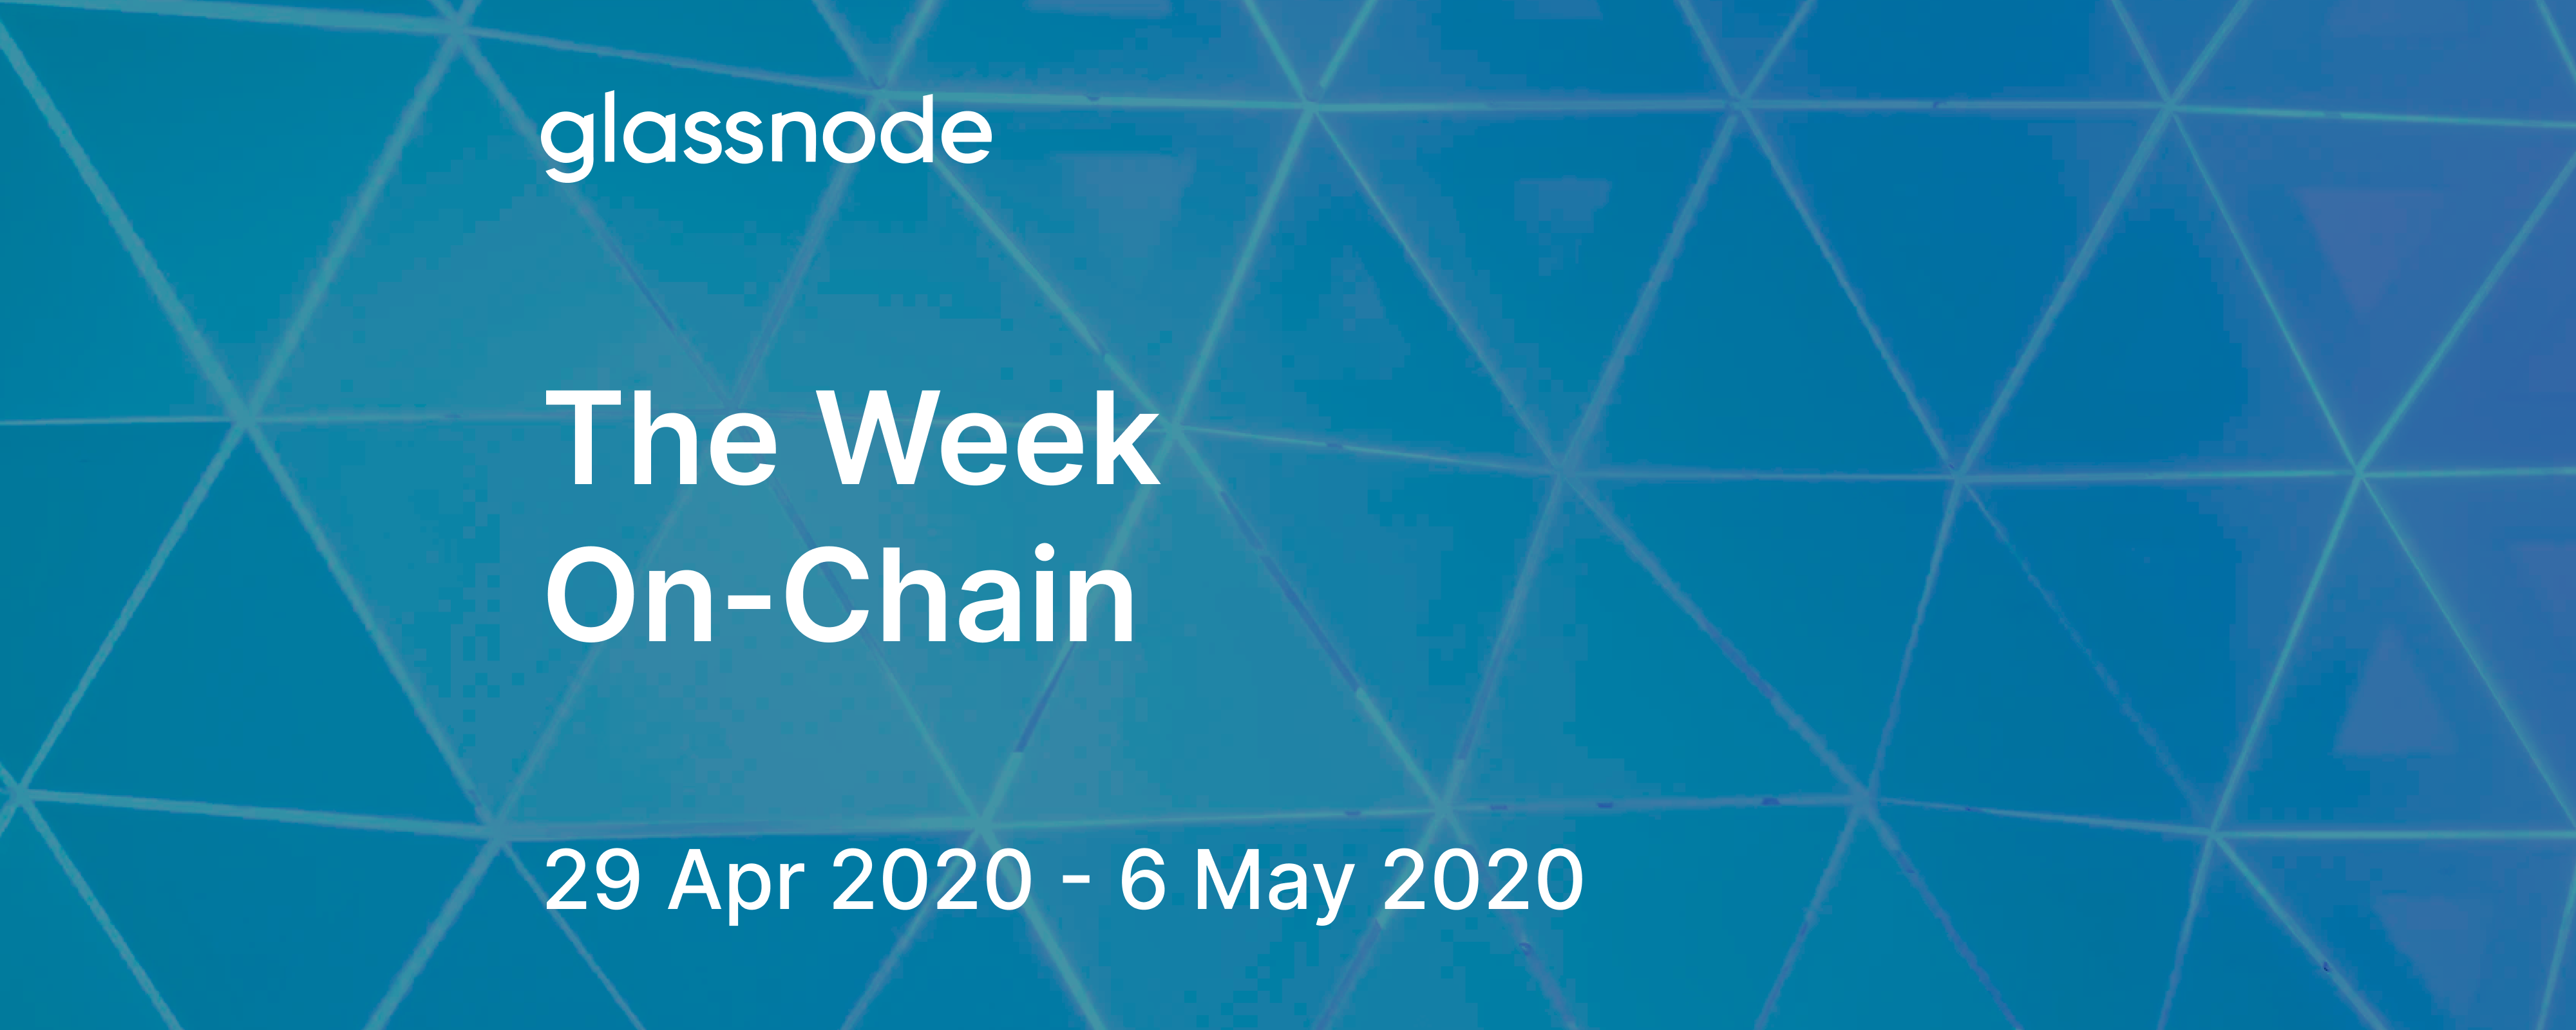 The Week On-Chain (29 Apr 2020 - 6 May 2020)